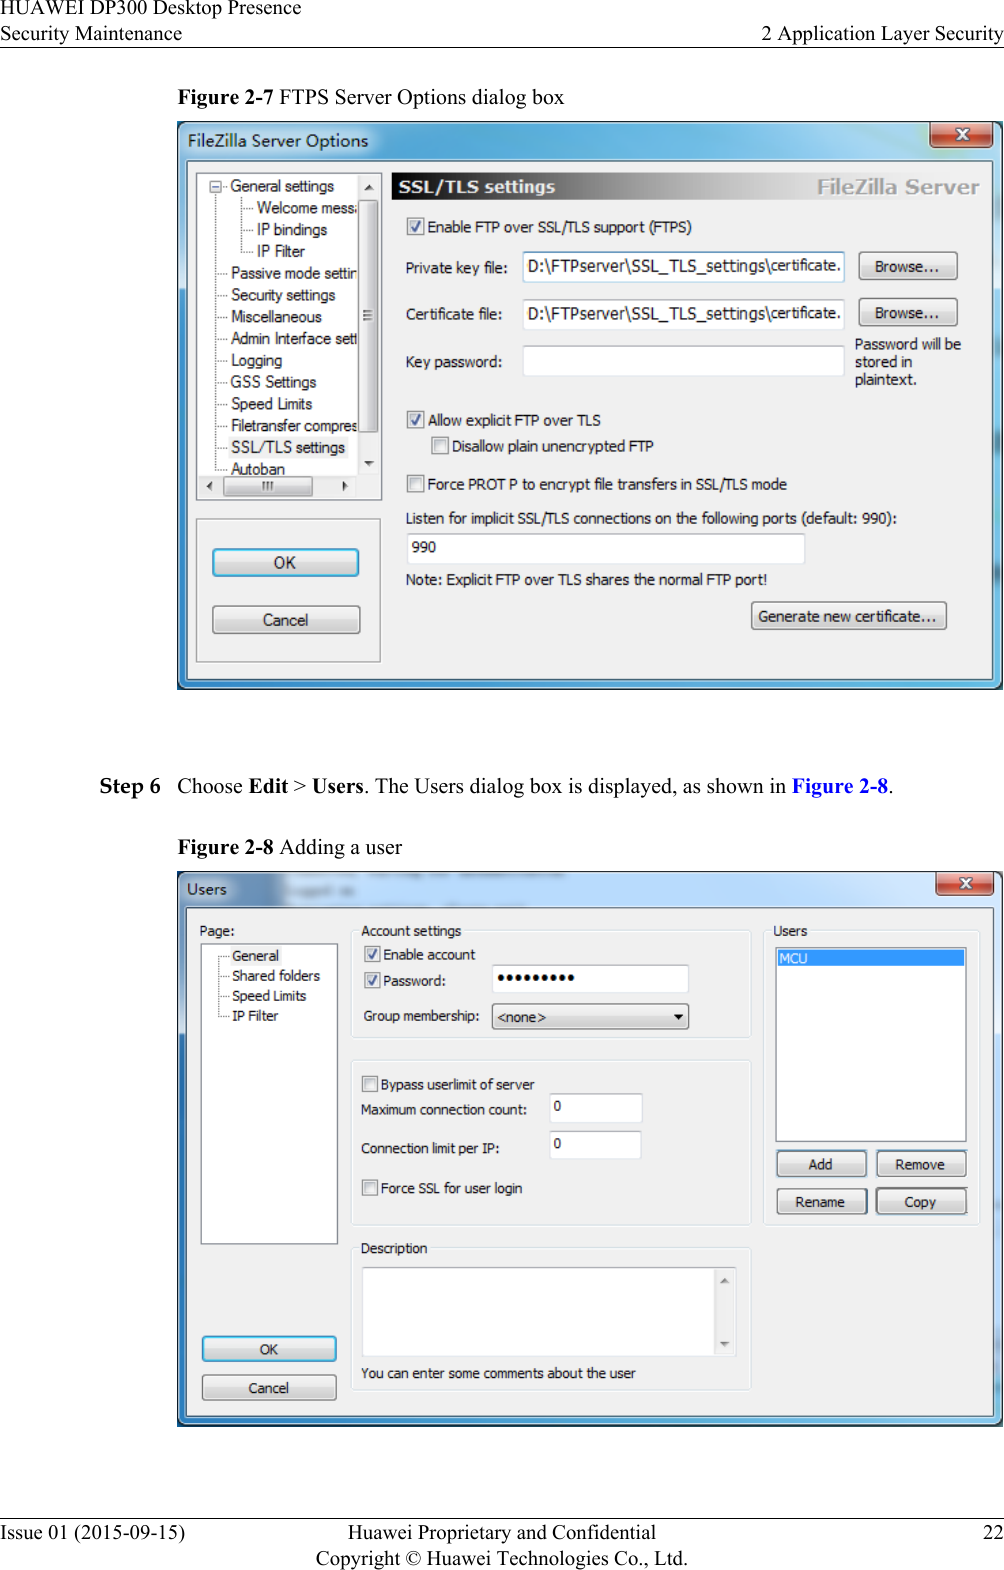 Figure 2-7 FTPS Server Options dialog box Step 6 Choose Edit &gt; Users. The Users dialog box is displayed, as shown in Figure 2-8.Figure 2-8 Adding a userHUAWEI DP300 Desktop PresenceSecurity Maintenance 2 Application Layer SecurityIssue 01 (2015-09-15) Huawei Proprietary and ConfidentialCopyright © Huawei Technologies Co., Ltd.22